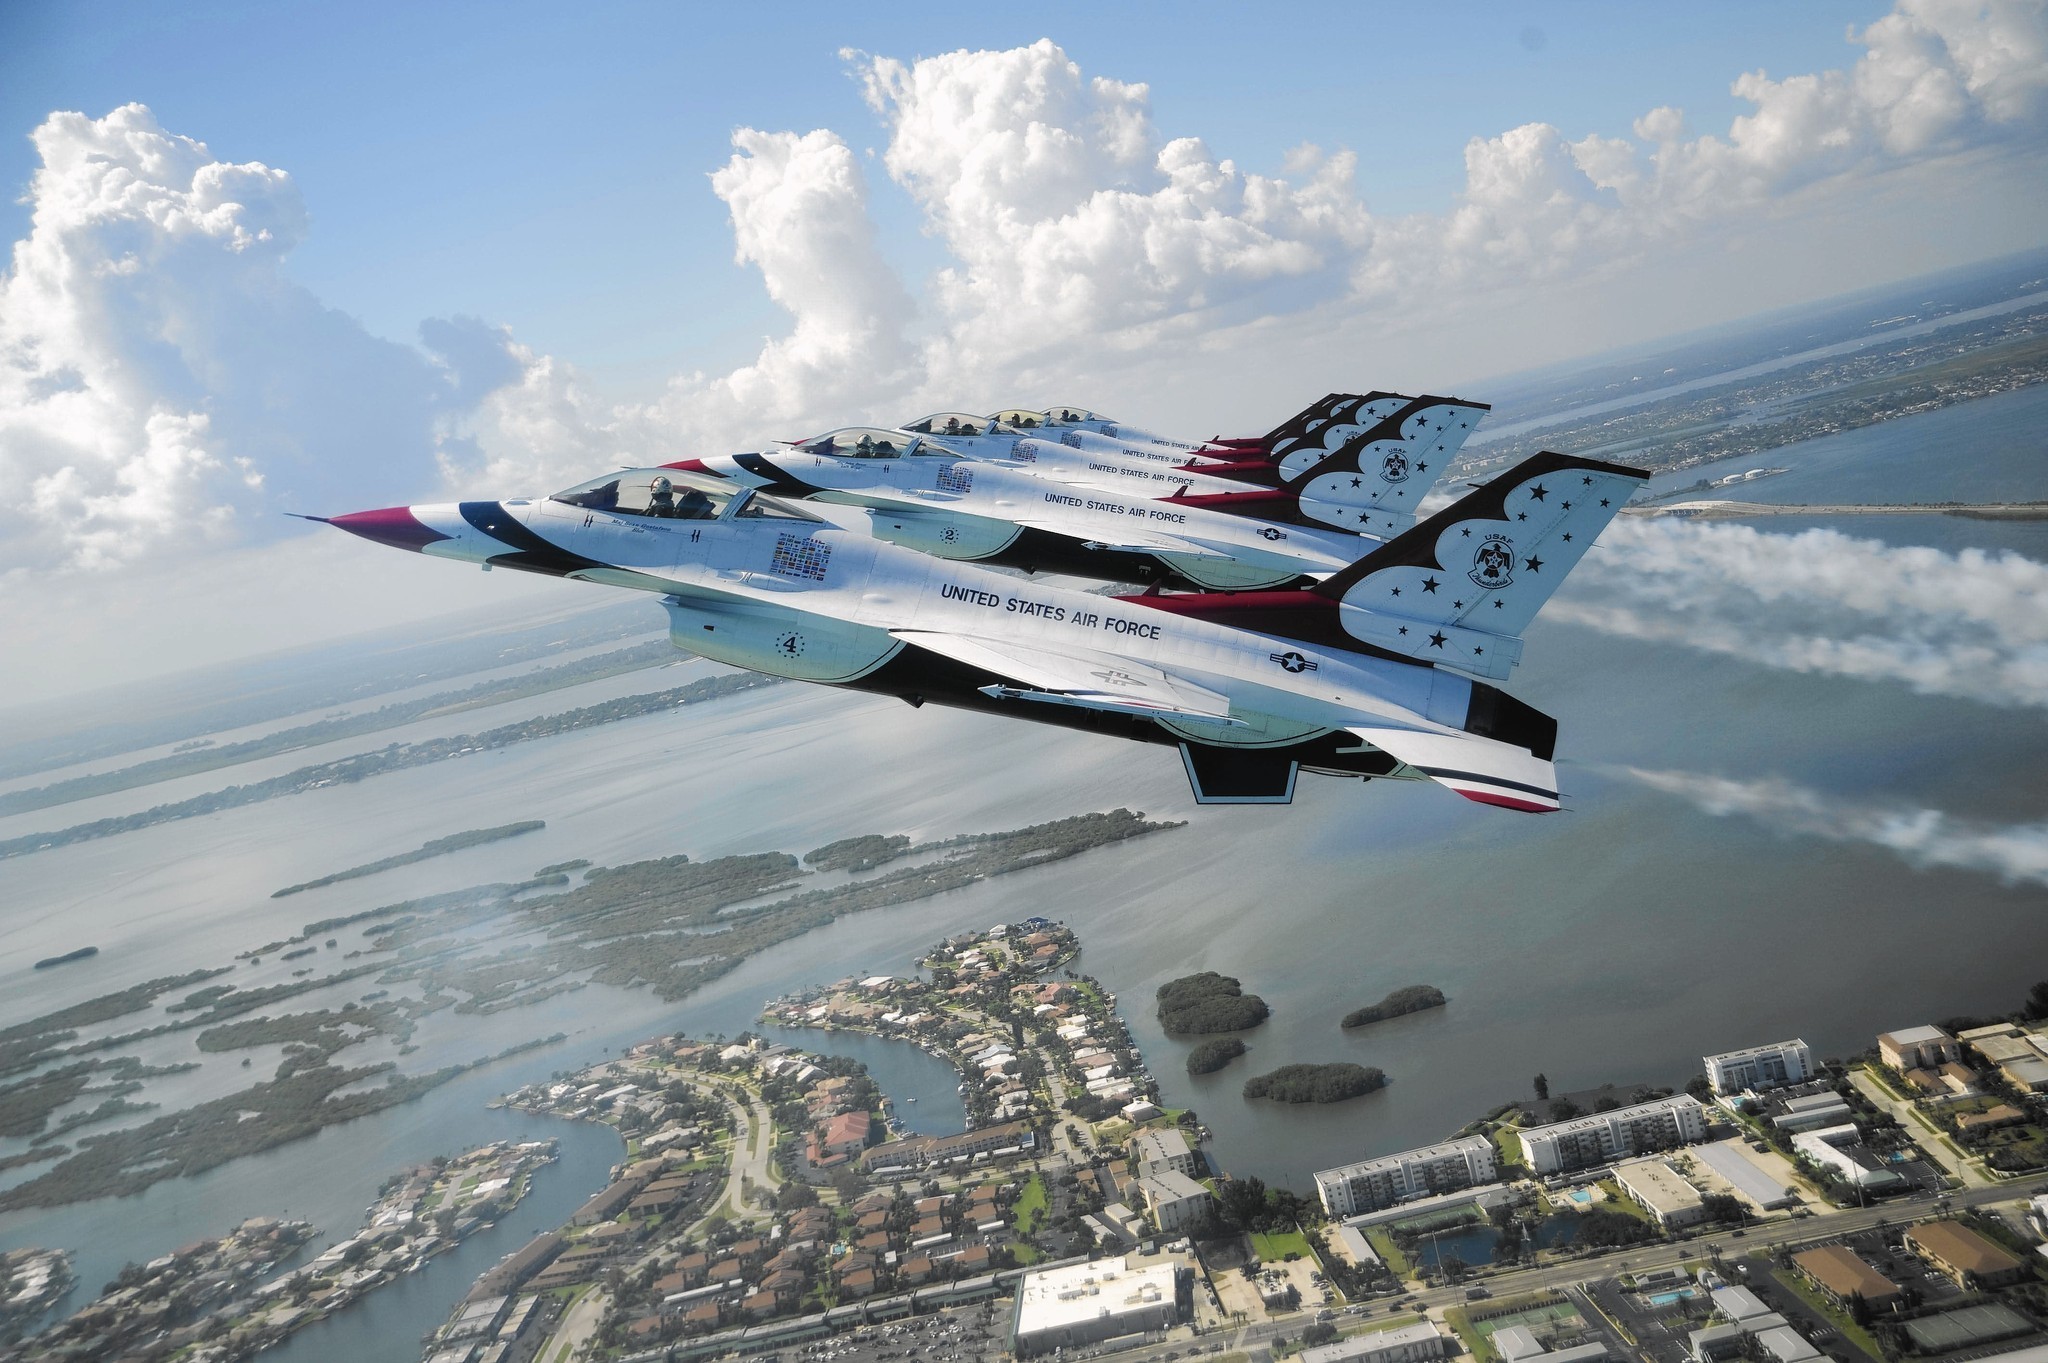 The Fort Lauderdale Air Show is back, and so are the Thunderbirds